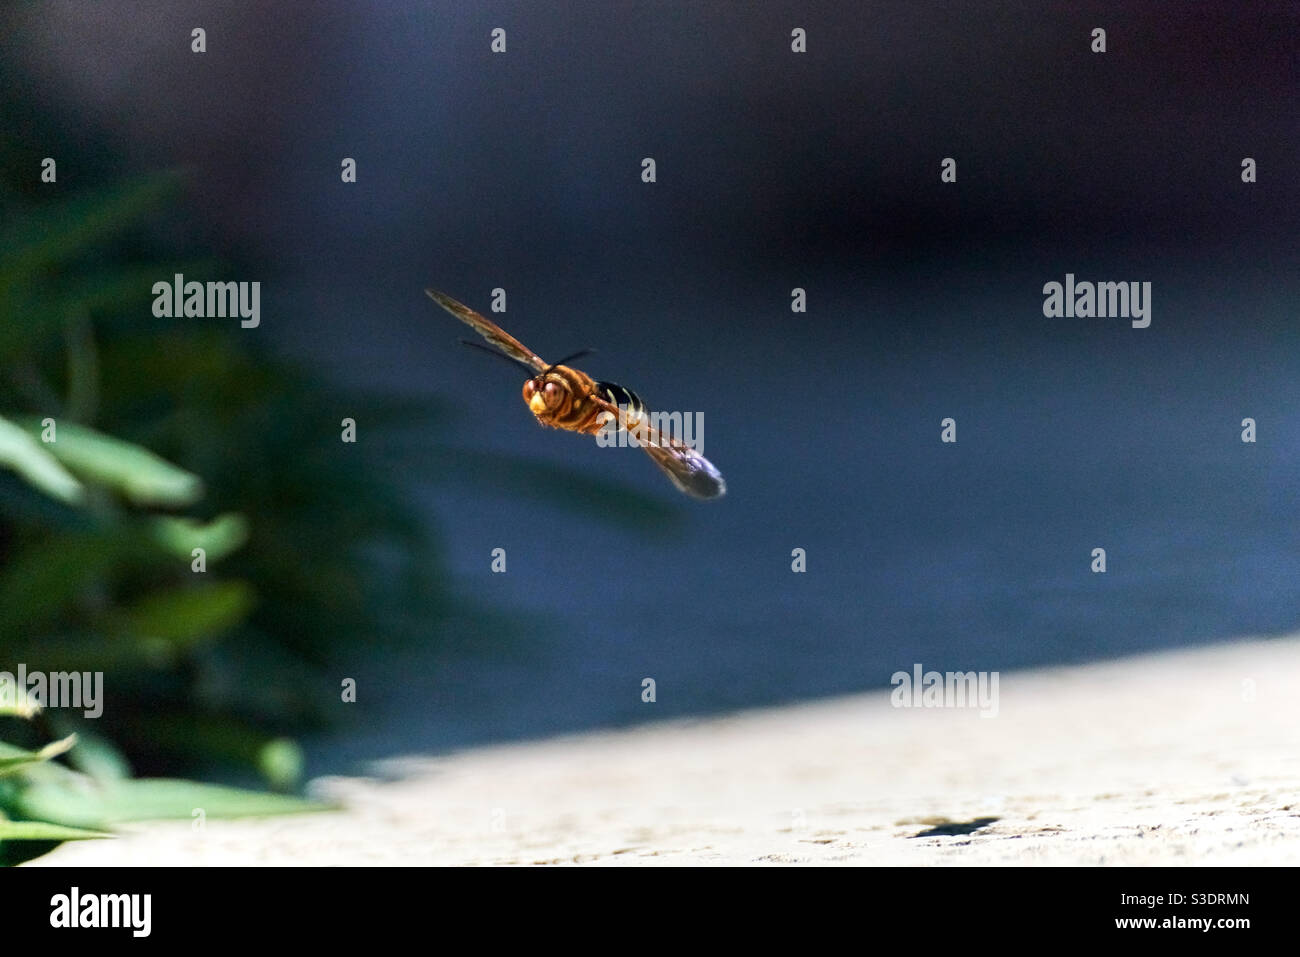 A big-eyed wasp flying around looking for a sip of water and about to land on some Spanish Grass. Notice his shadow on this warm, sunny day. Stock Photo